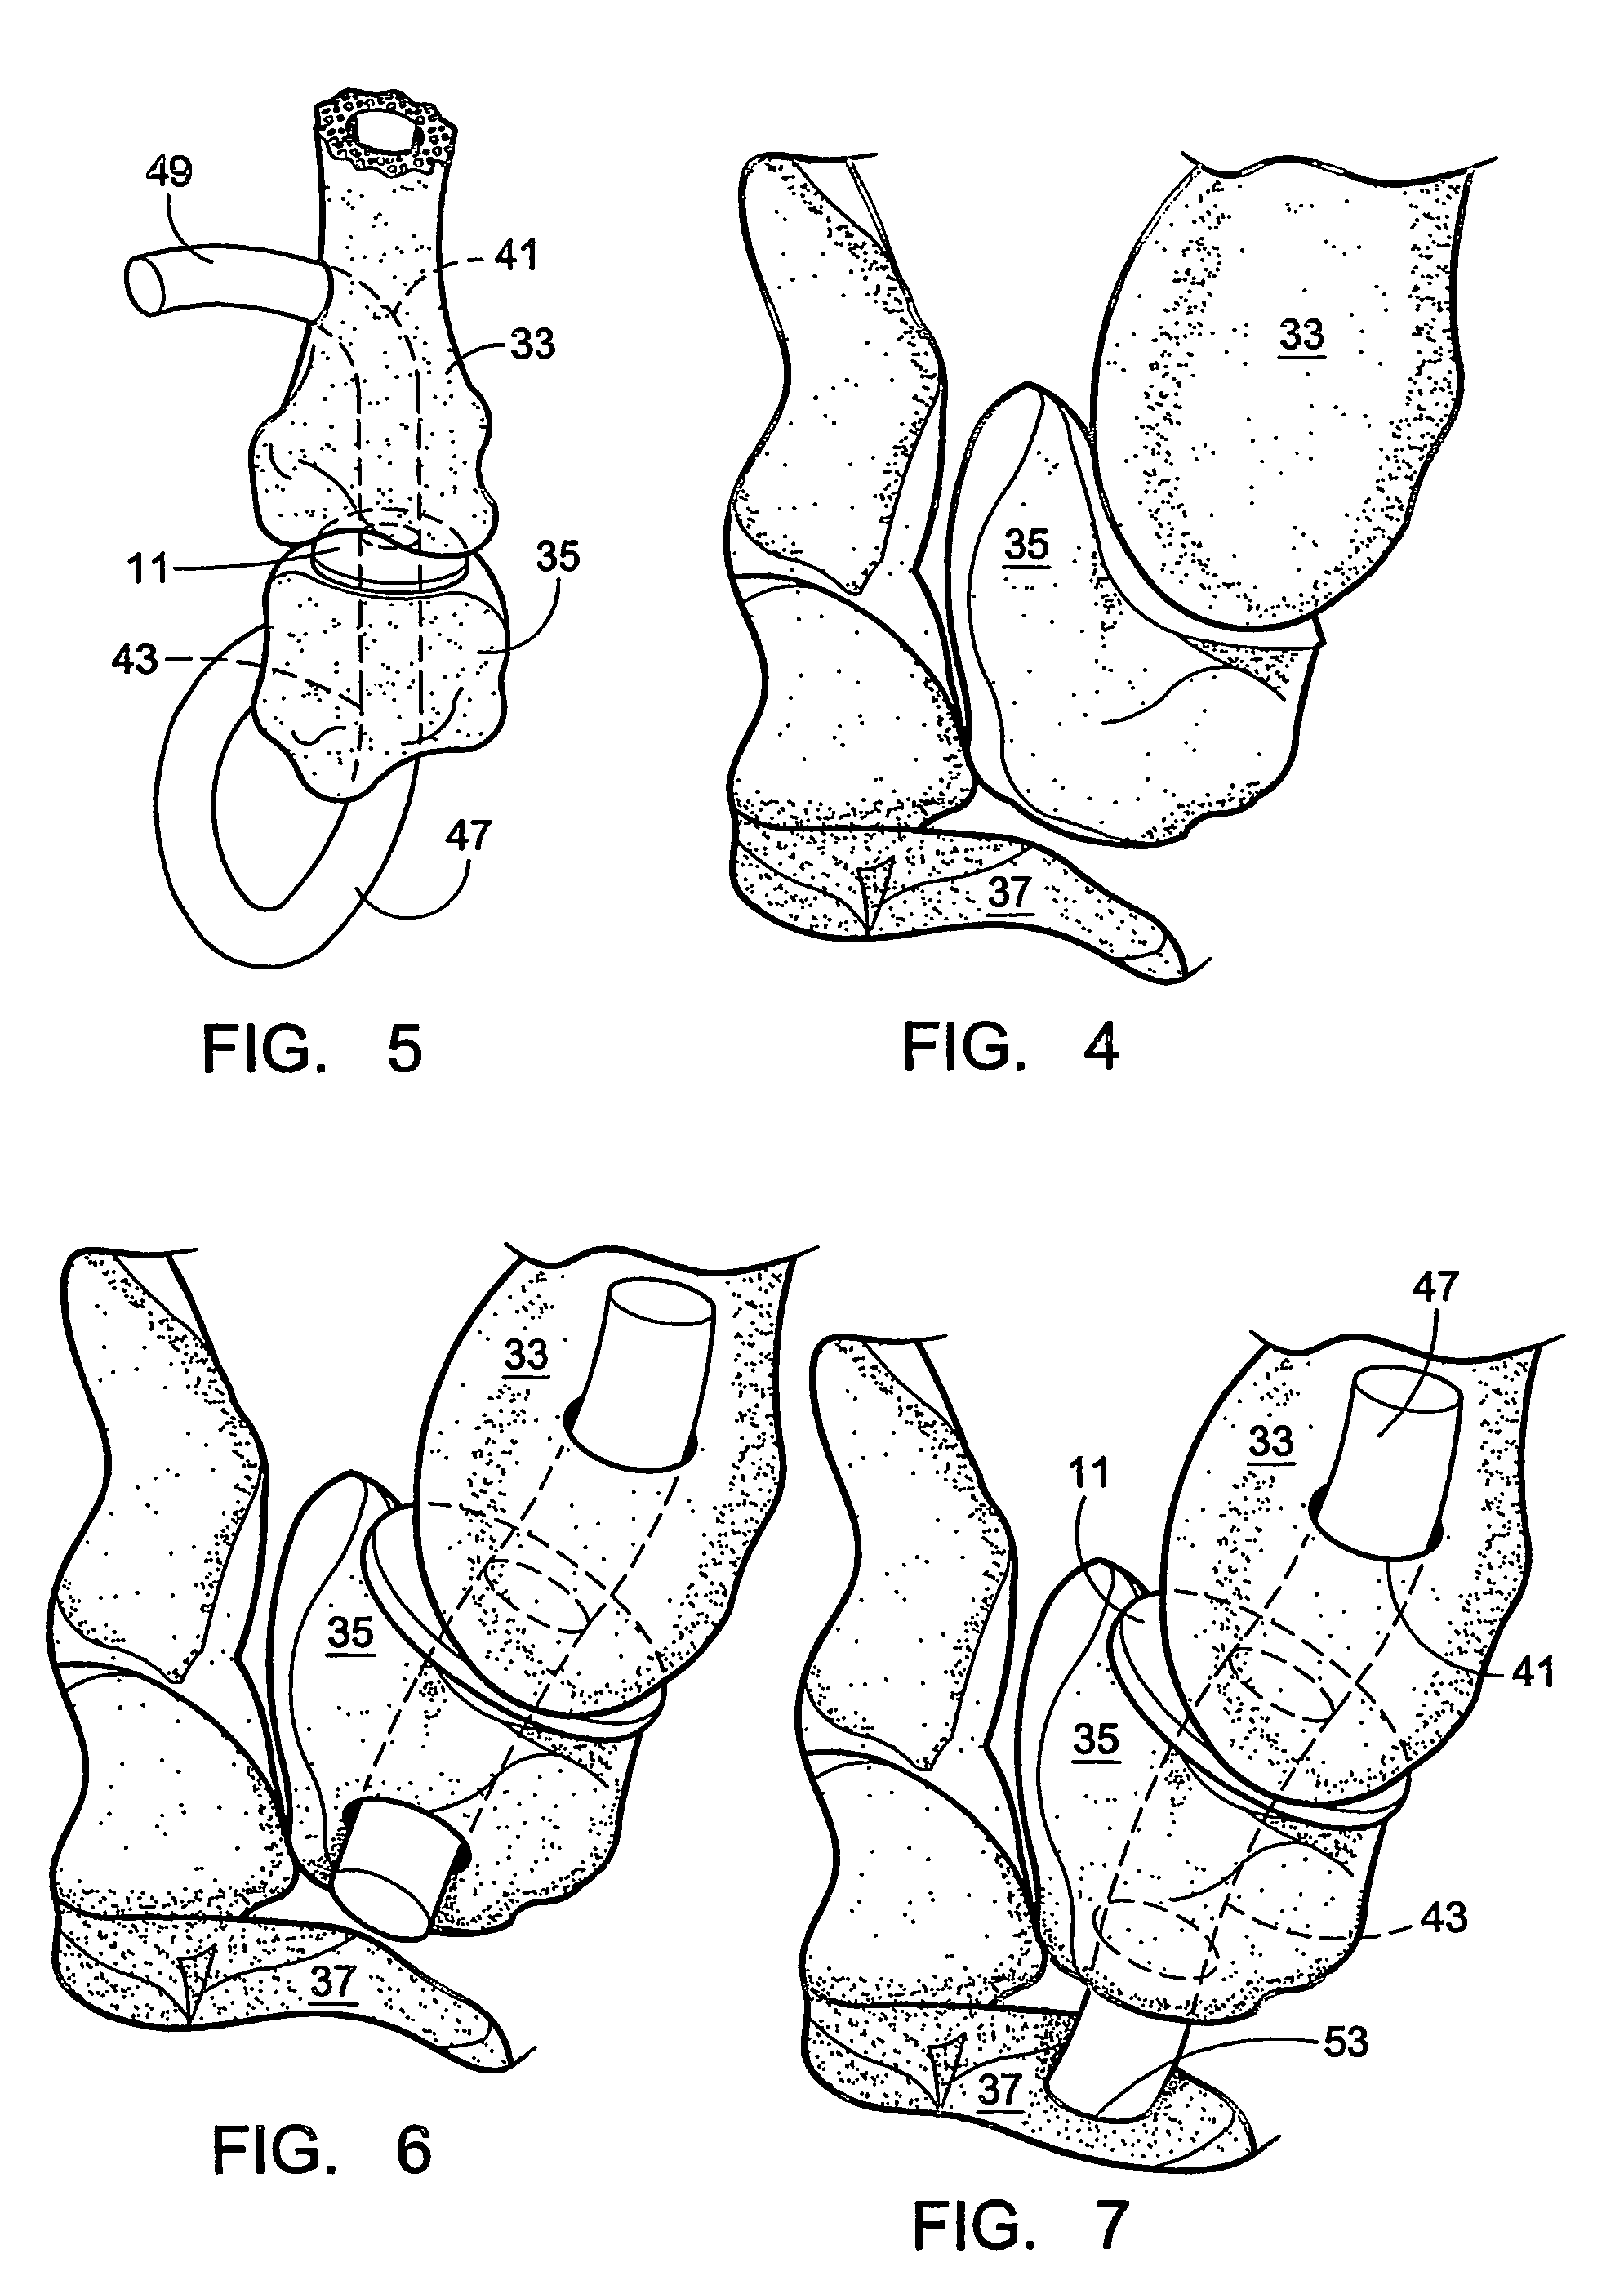 Interpositional biarticular disk implant